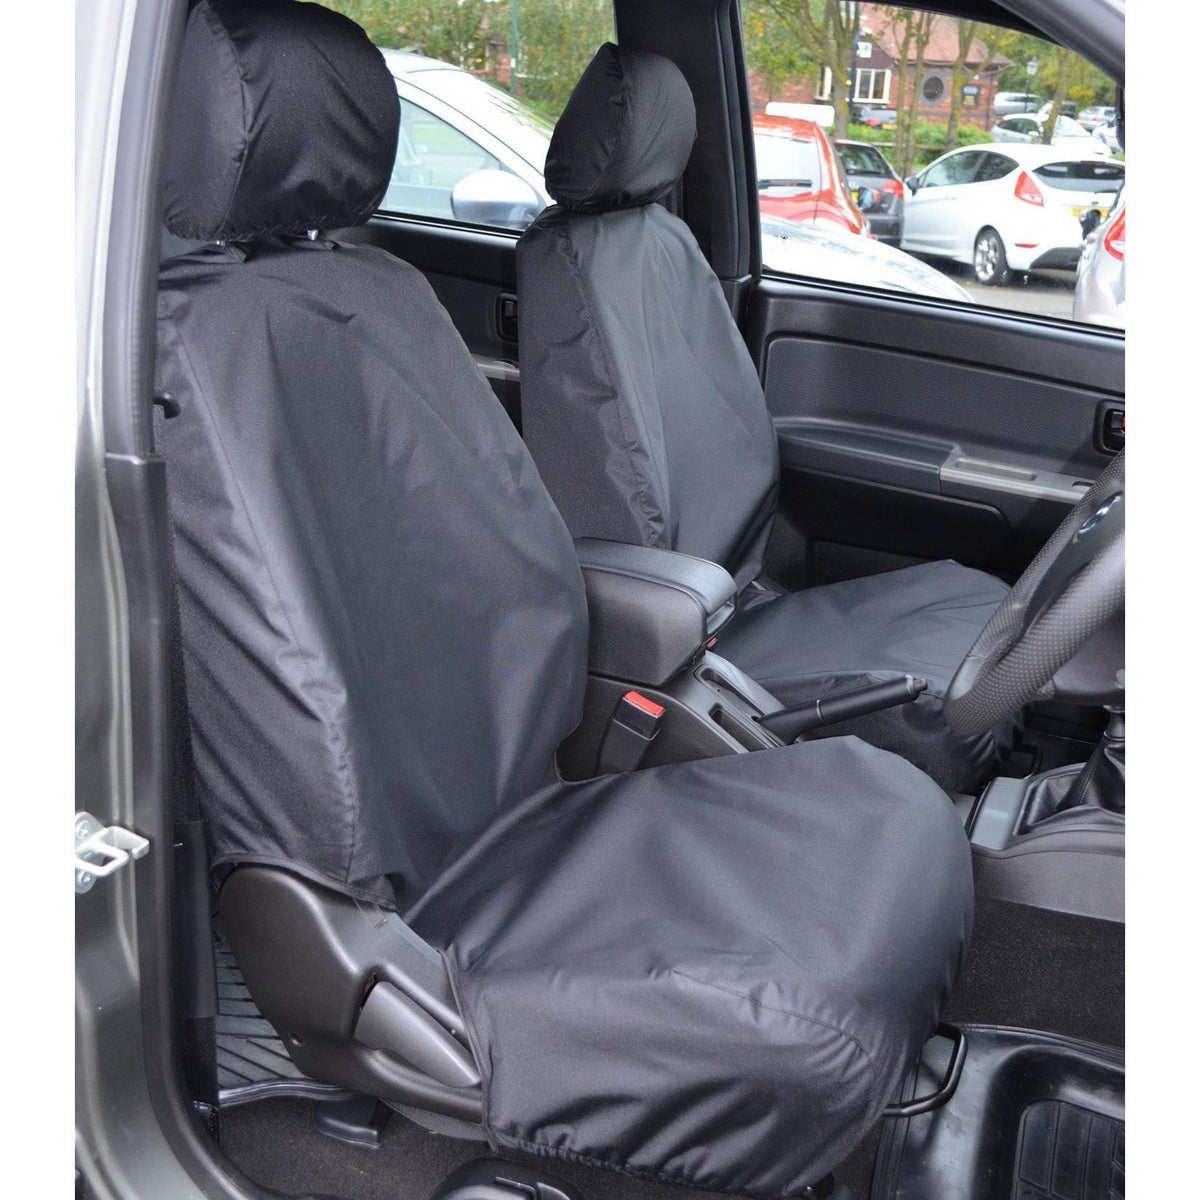 ISUZU RODEO D-MAX 2003-2012 DRIVER AND SINGLE PASSENGER SEAT COVERS - PAIR - BLACK - Storm Xccessories2